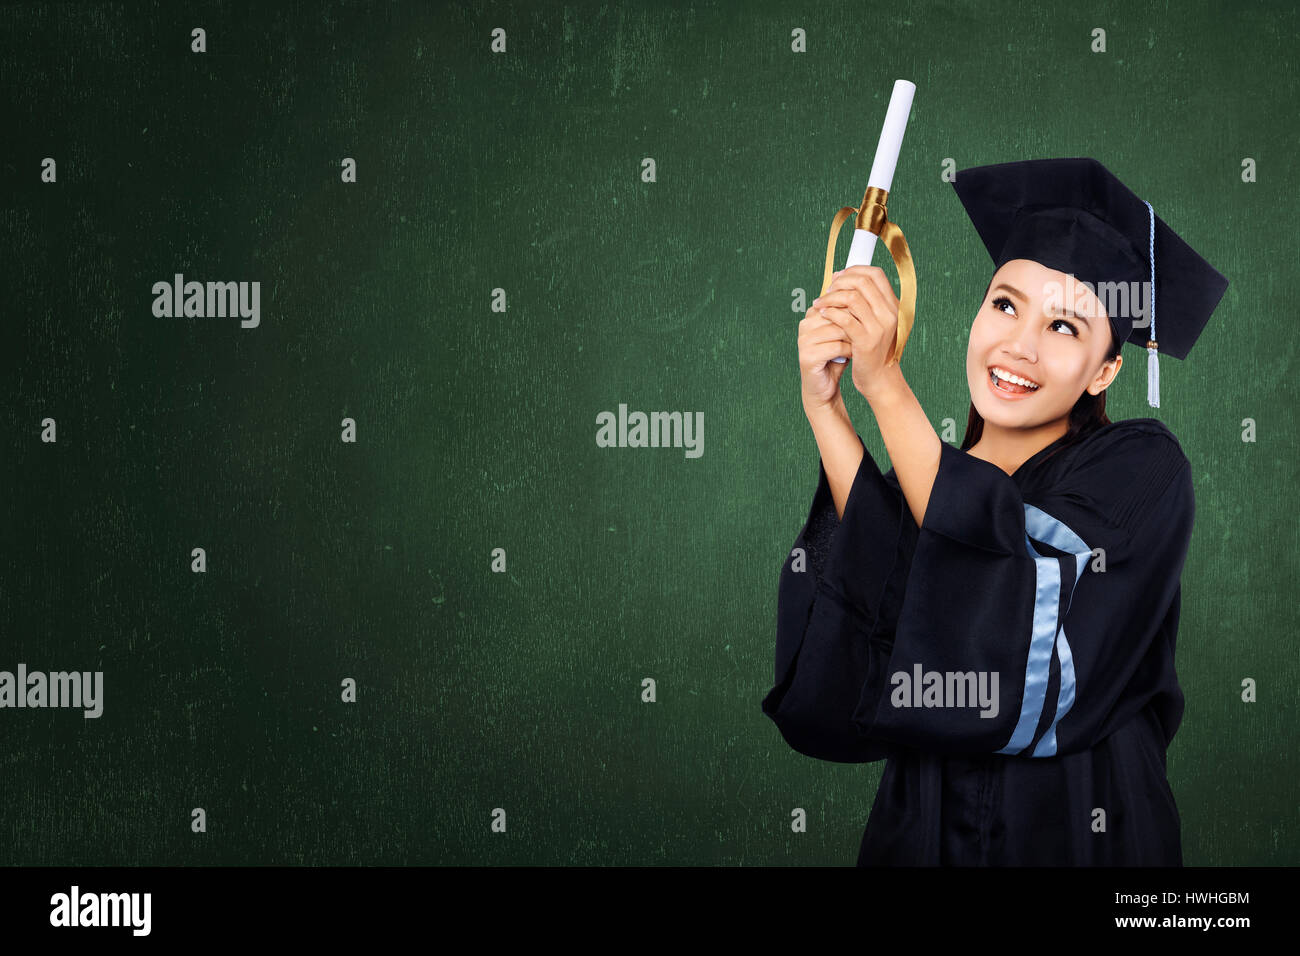 Happy graduated student girl with scroll on green chalkboard background Stock Photo